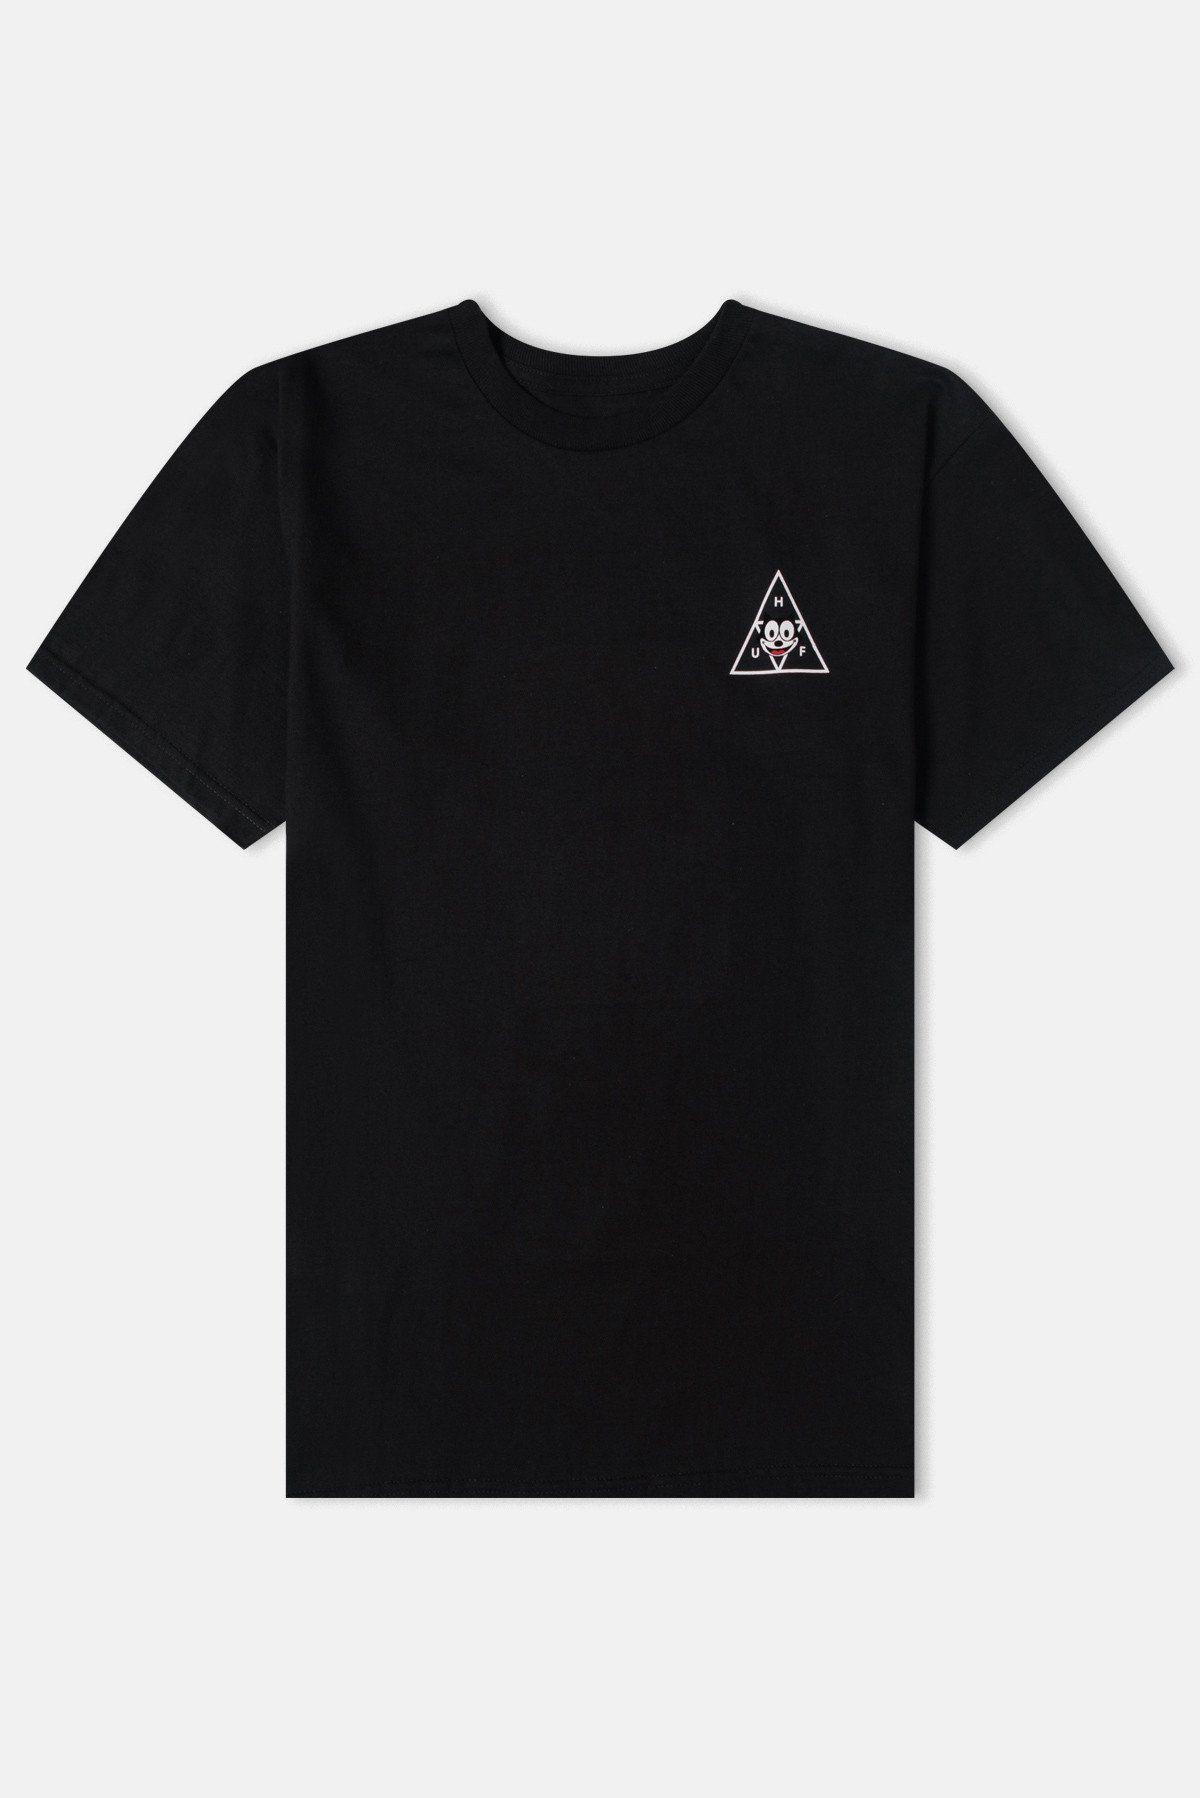 Black Cat Triangle Logo - Huf x Felix The Cat Triple Triangle S S T-Shirt available from Priory